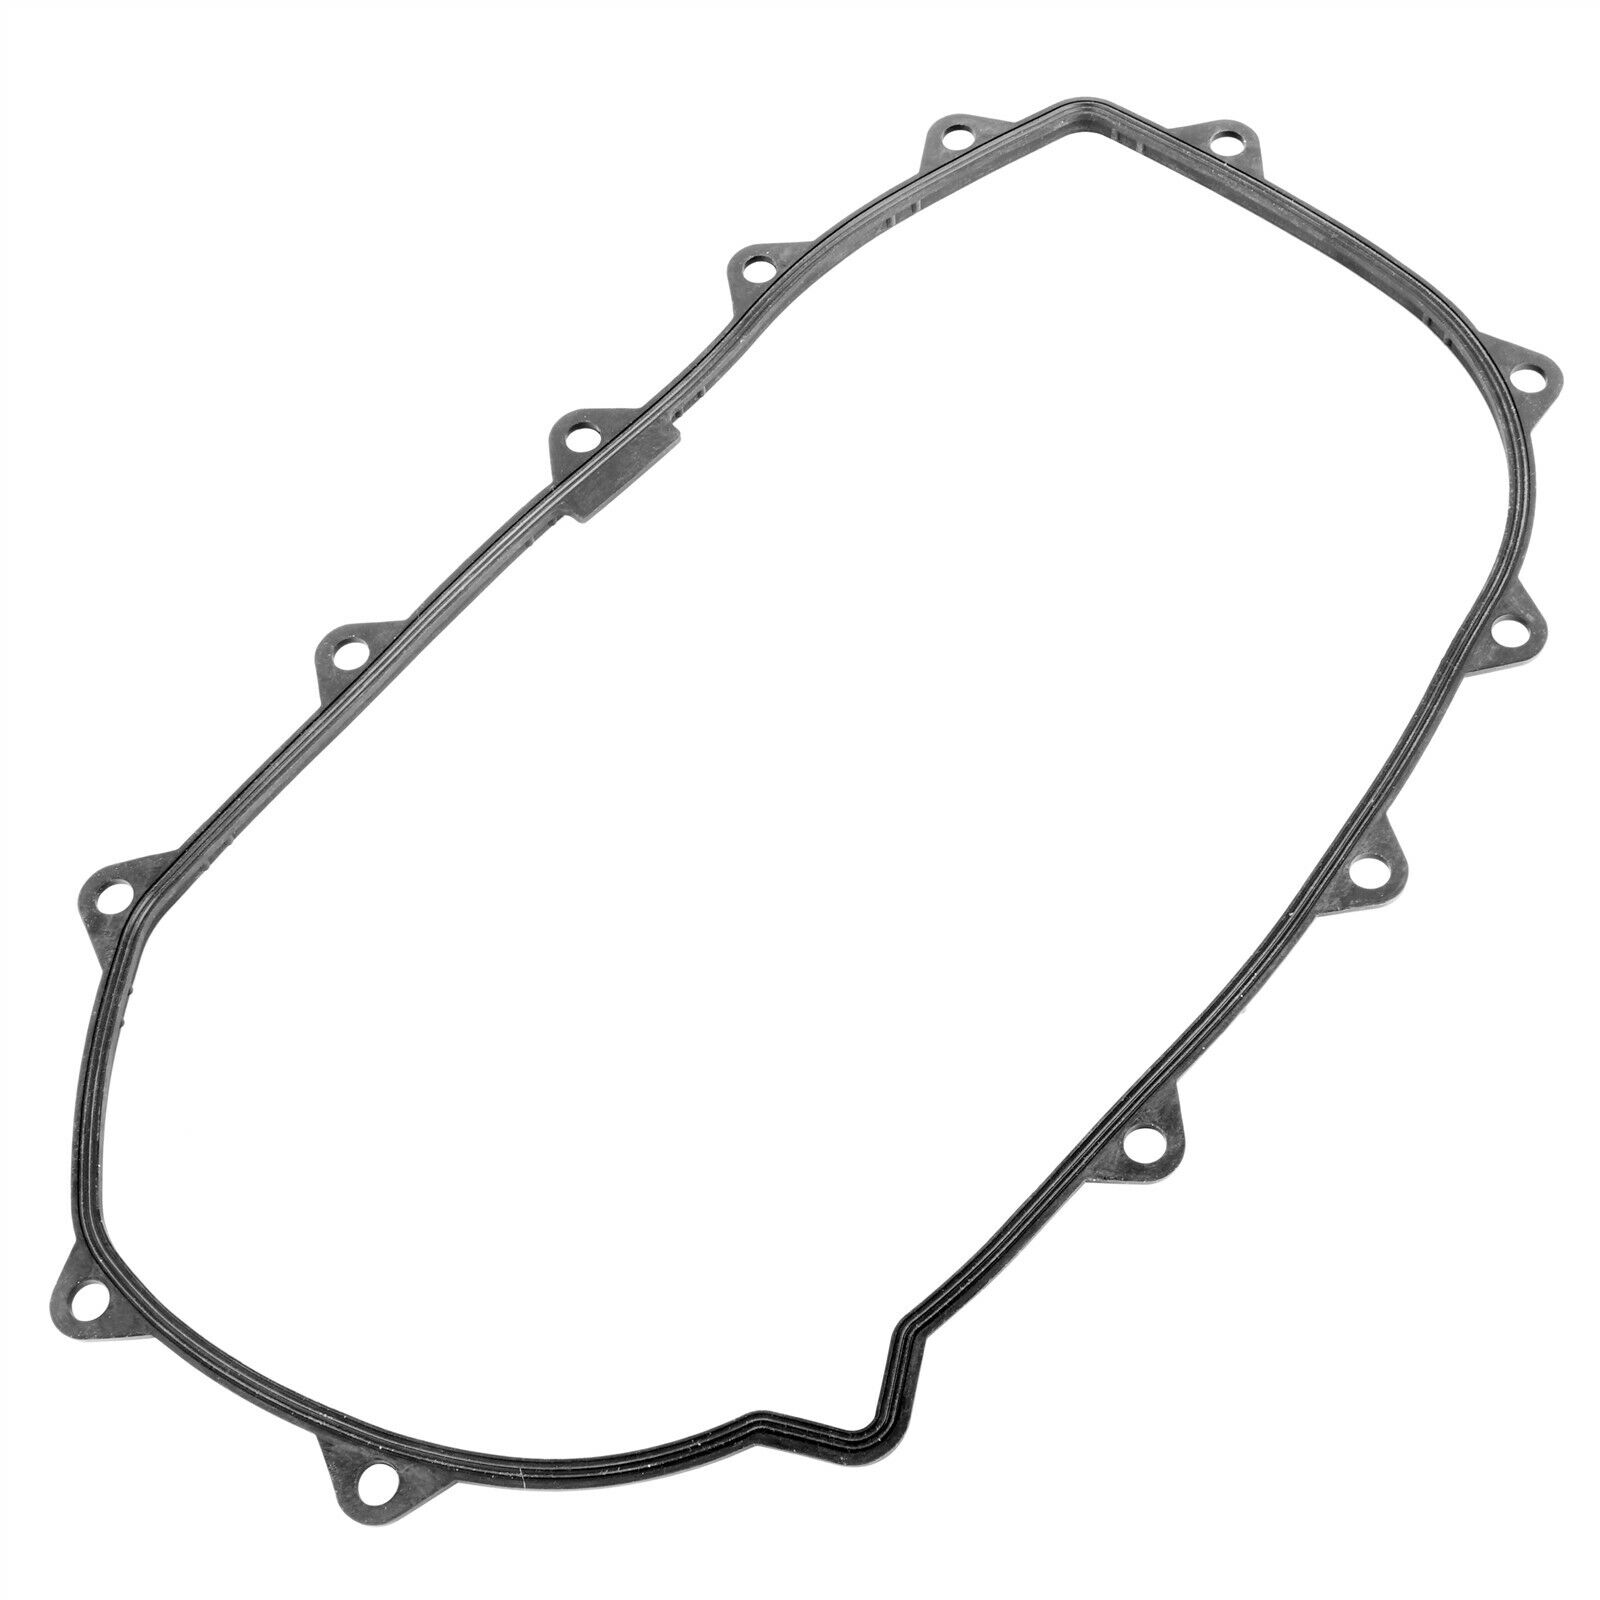 CVT Clutch Cover Gasket Fits Can-Am Outlander 800 800R/ MAX 800R 4X4 2006 - 2015 - image 2 of 3